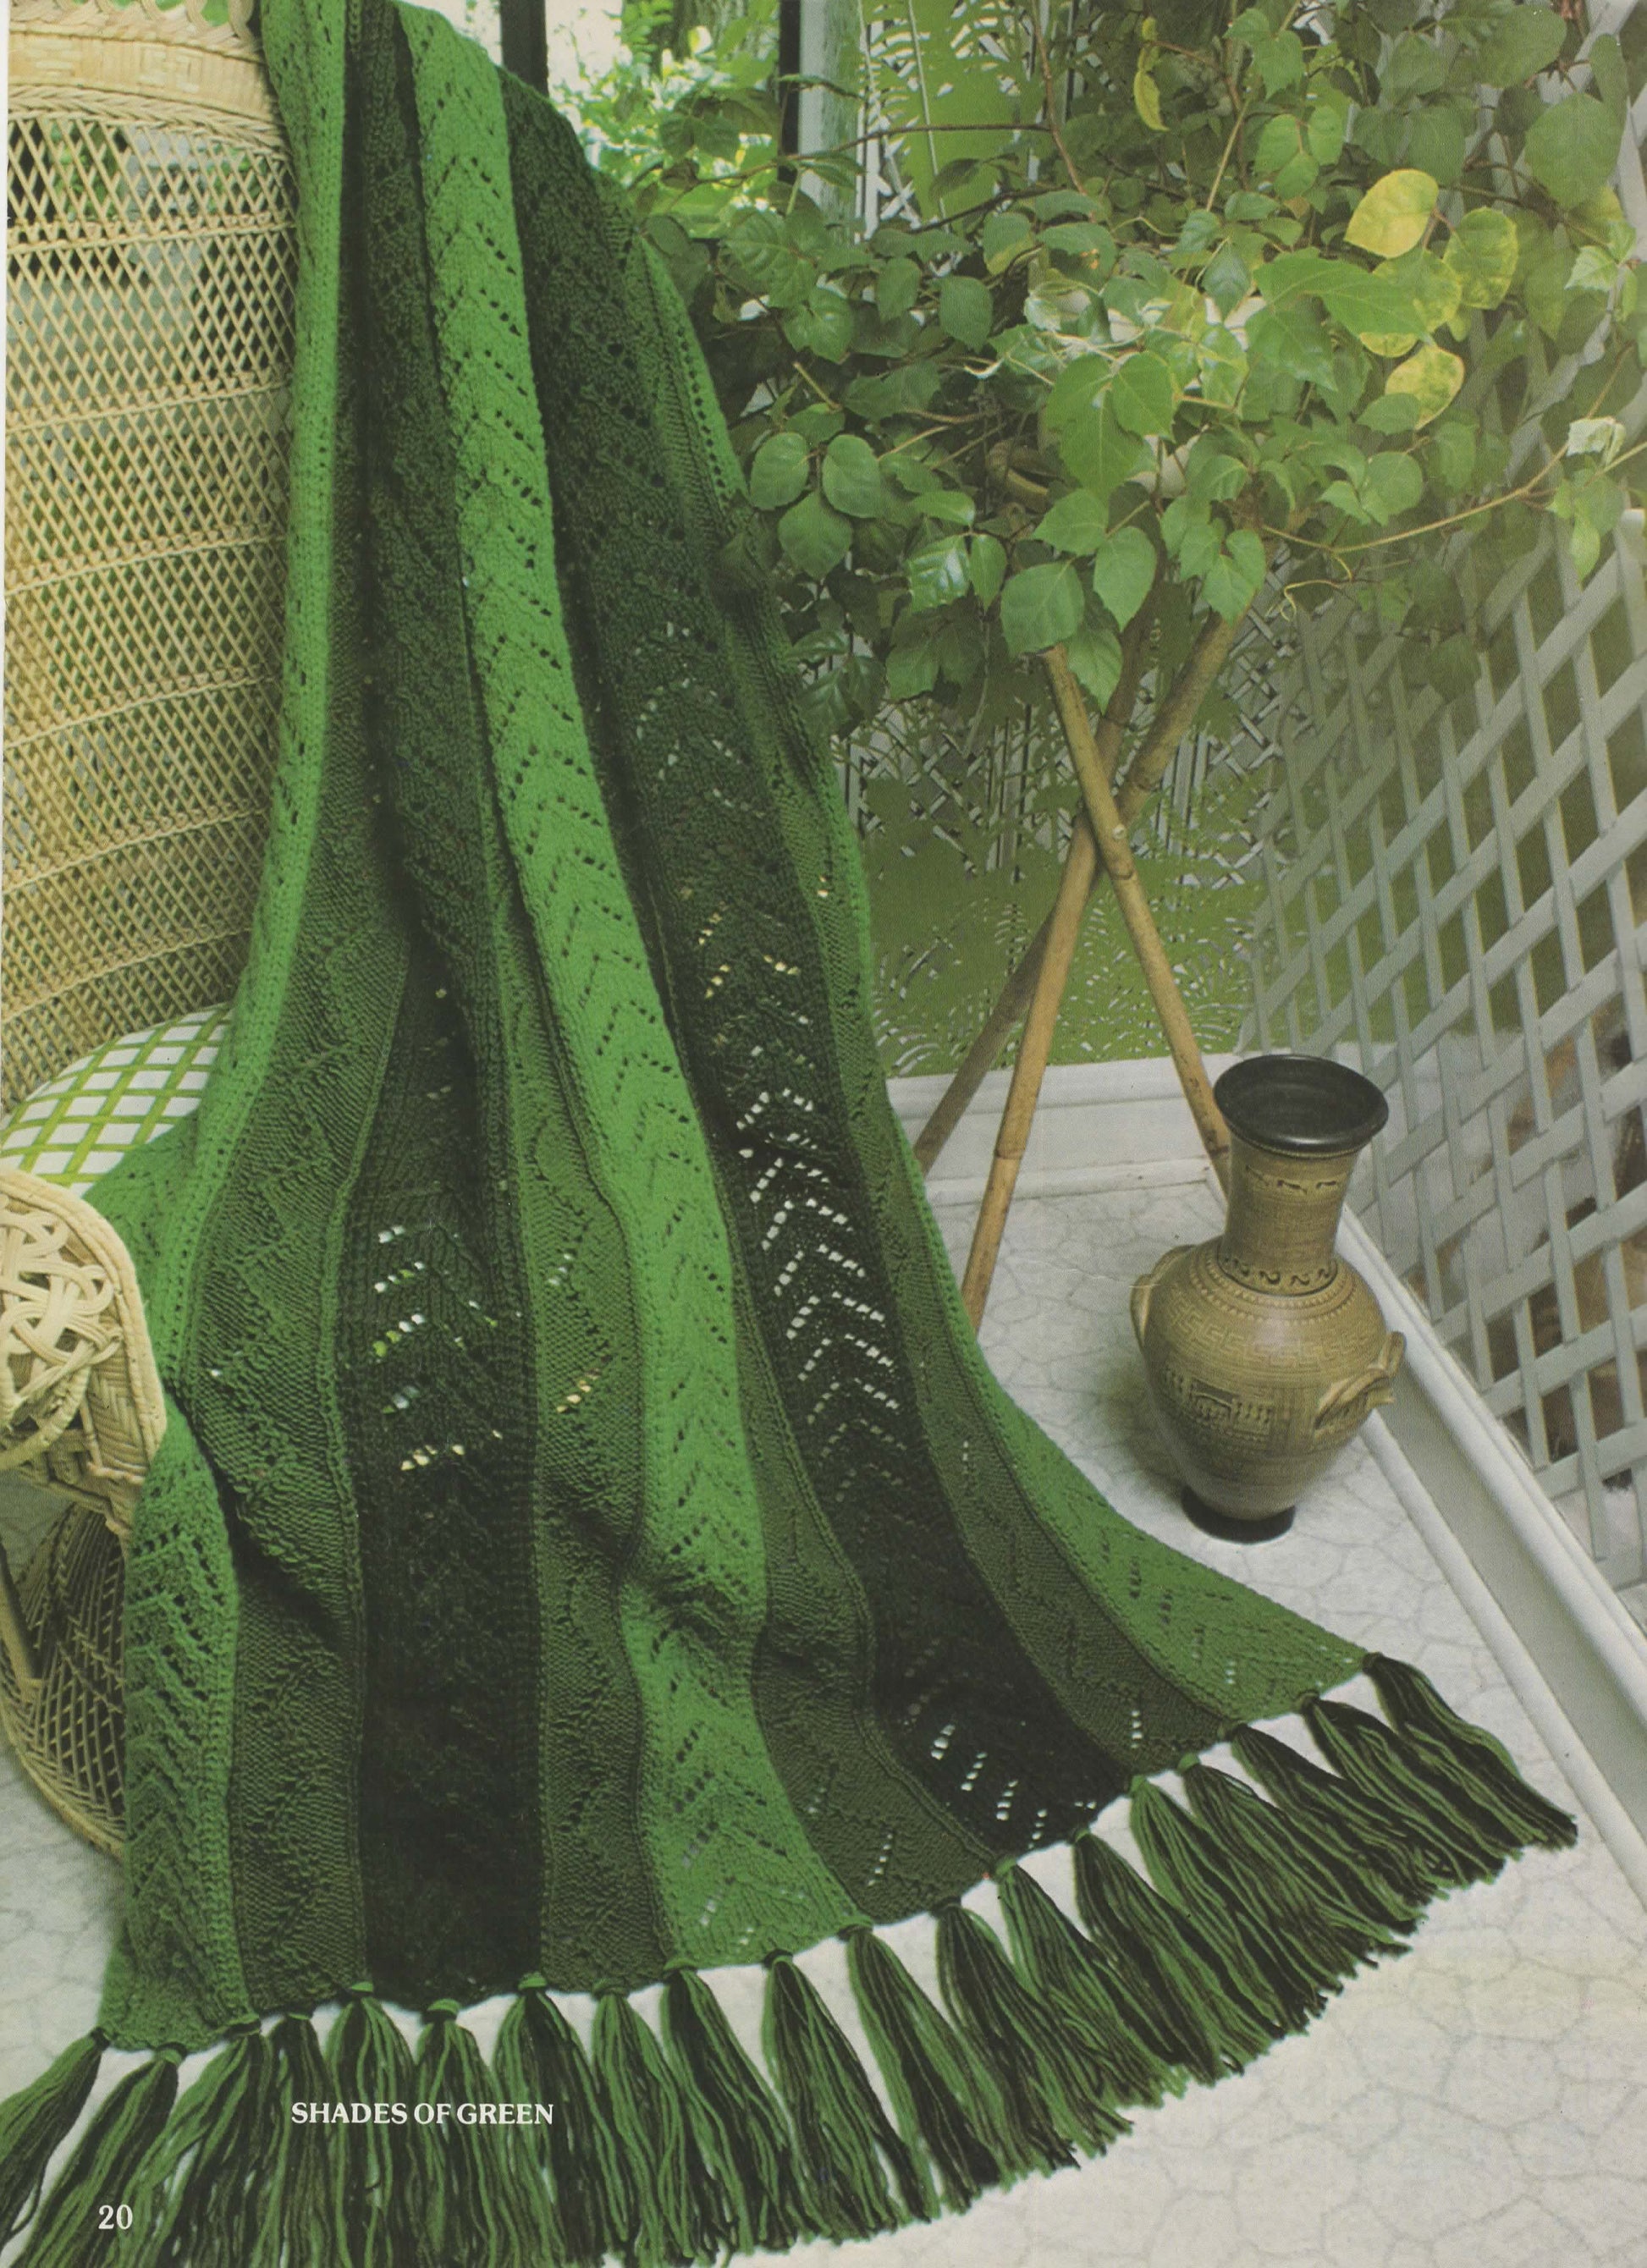 Vintage Knit Afghan Pattern Shades of Green Downloadable PDF - At Grandma's Table